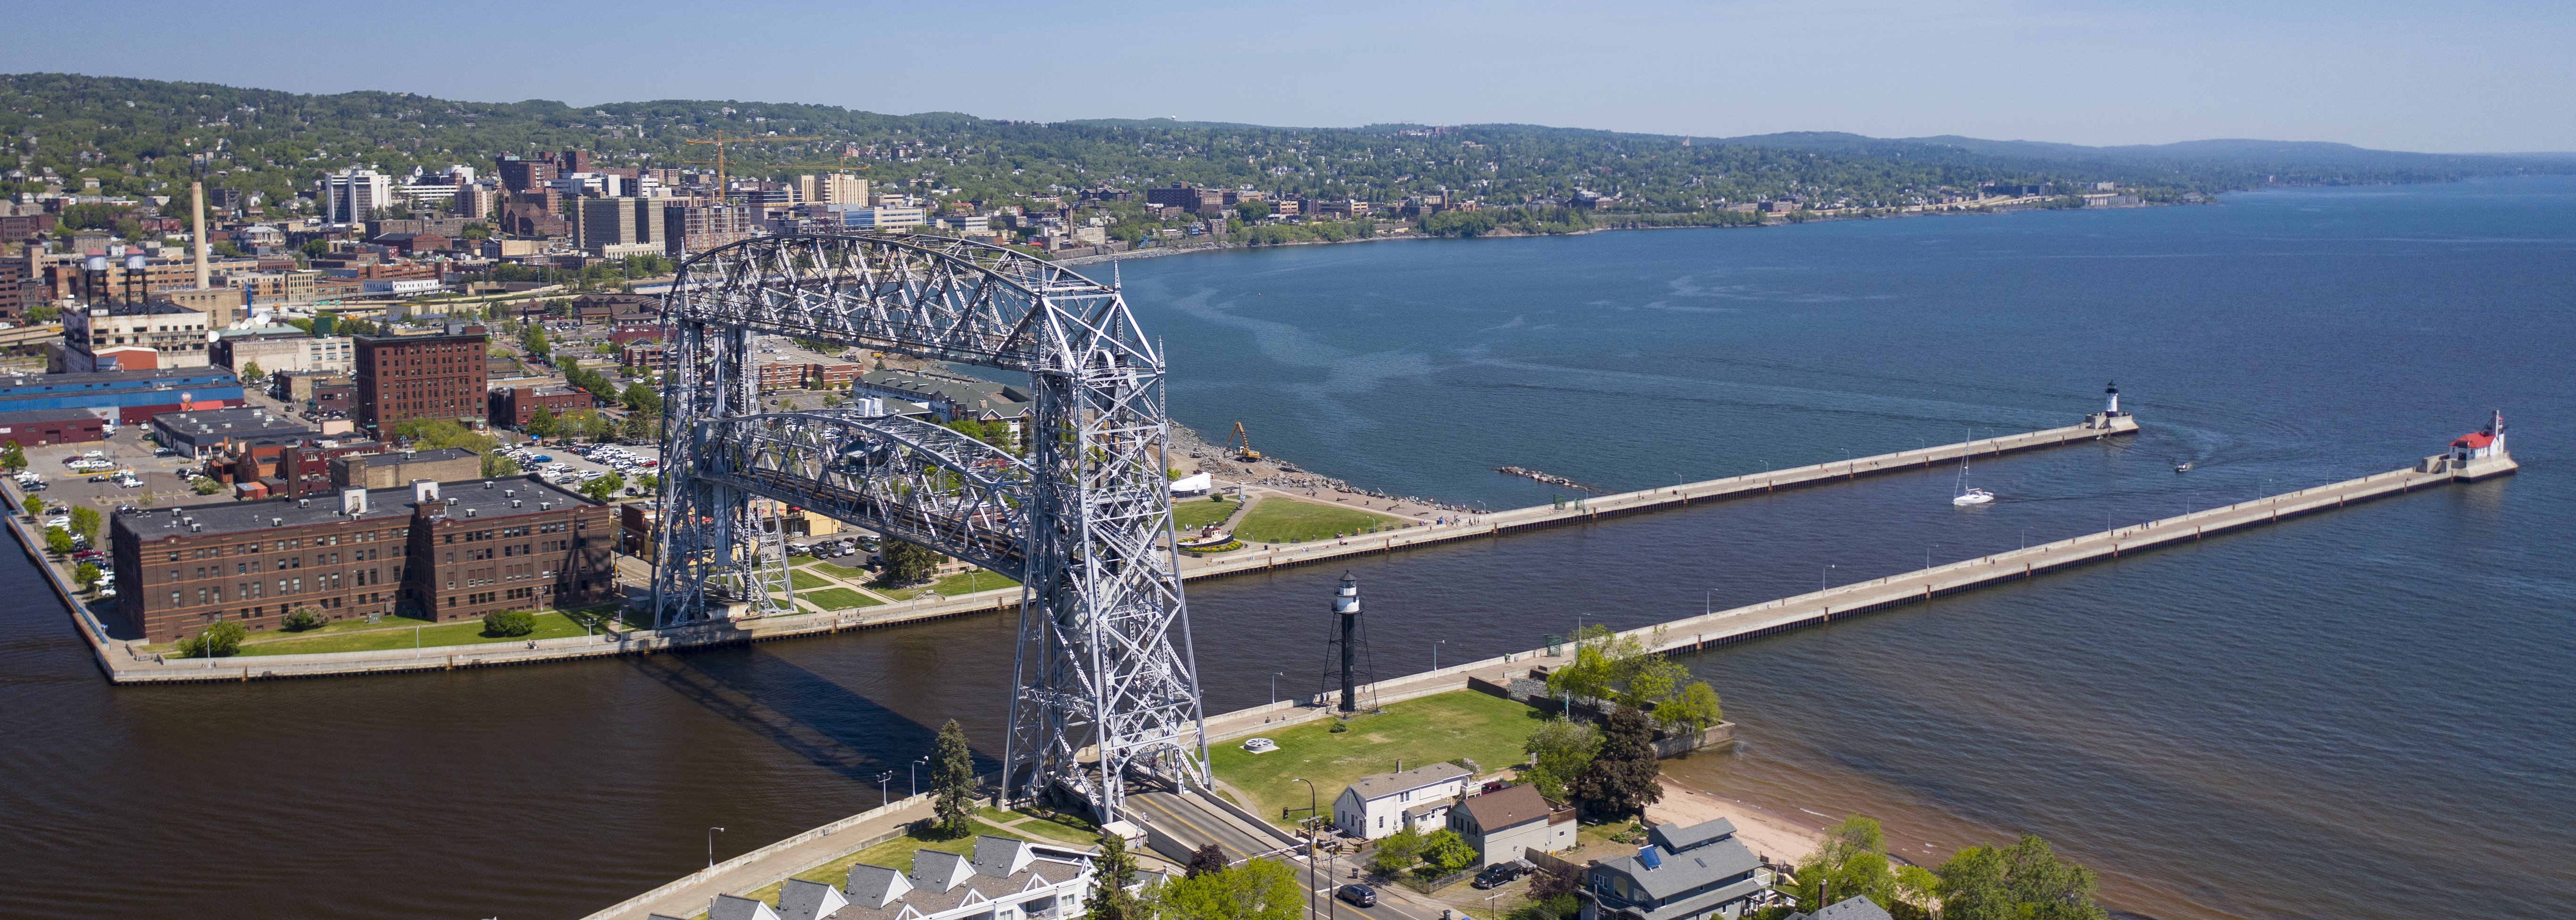 Aerial view of Duluth and the Lift Bridge